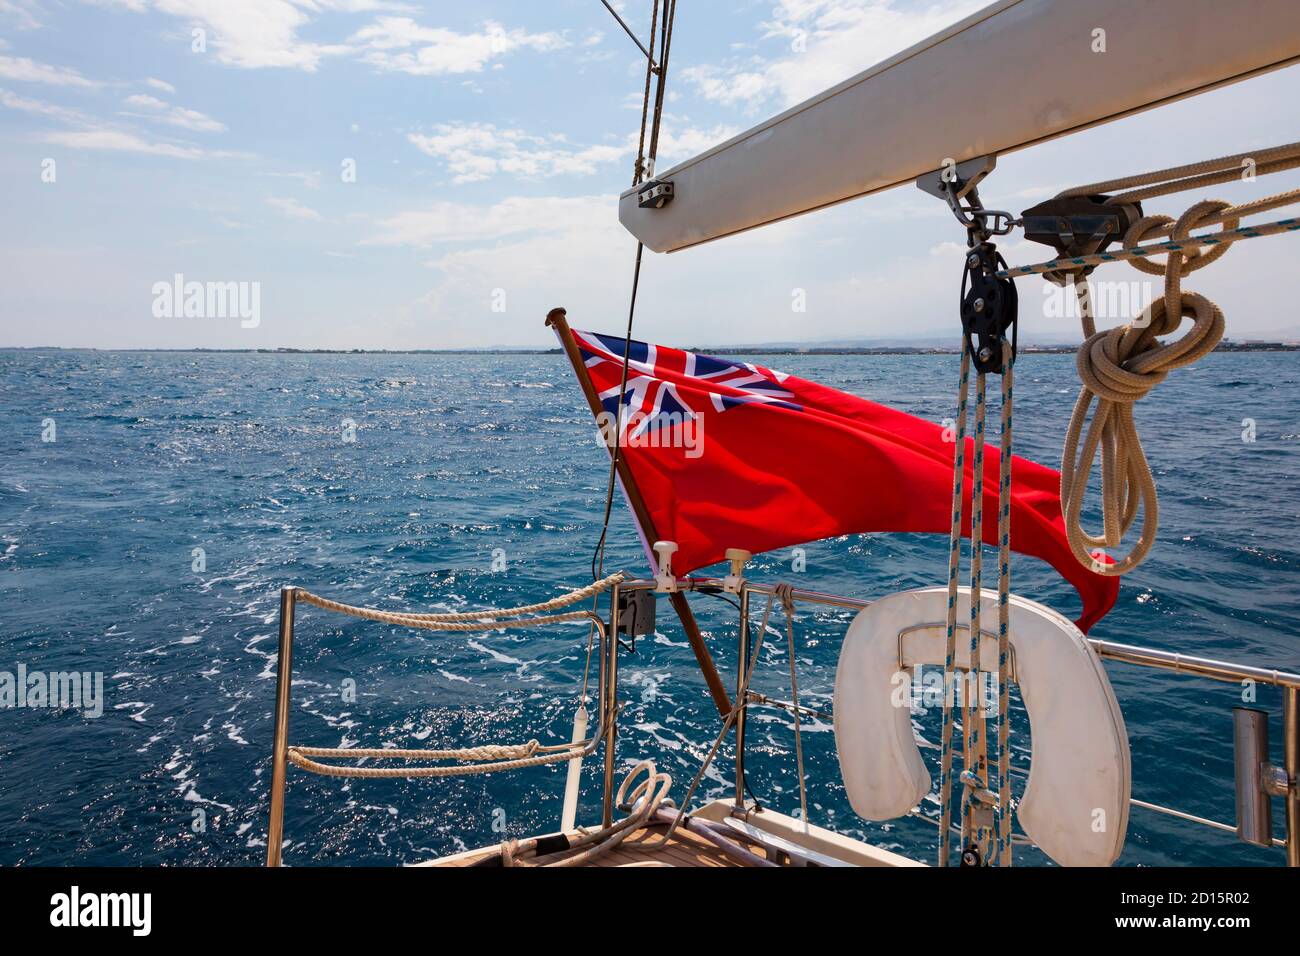 British Red Ensign flag flying on the stern of a yacht under sail in the Mediterranean Sea, off the coast of Cyprus. Cyprus Stock Photo